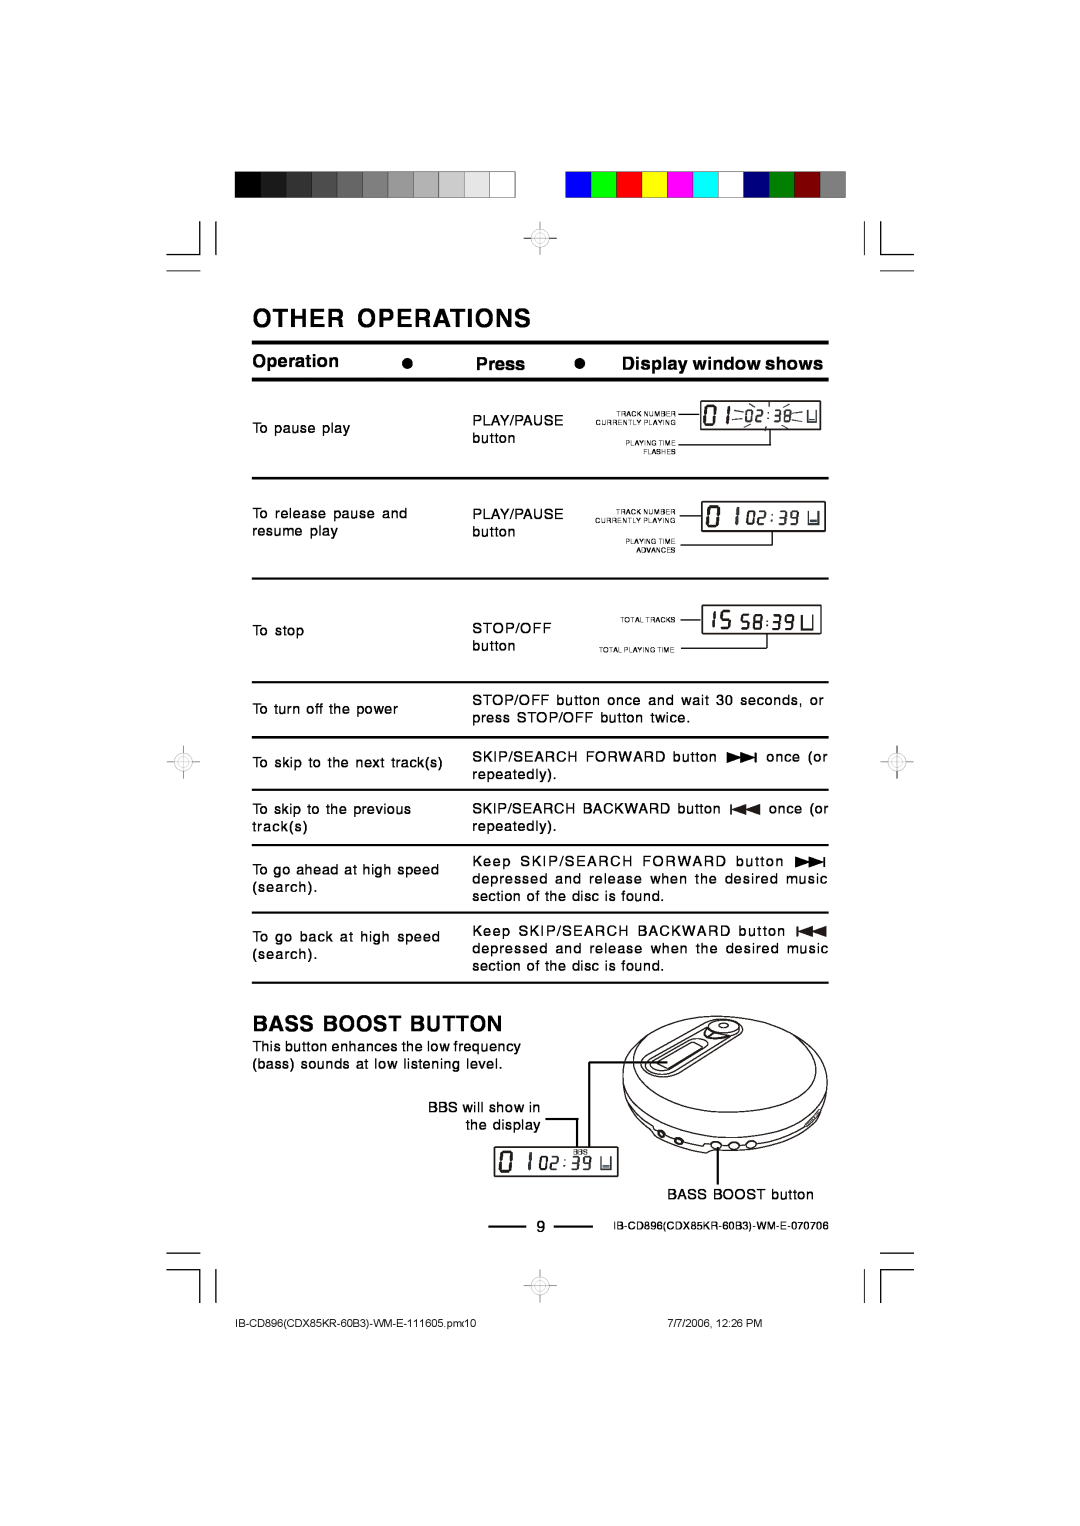 Lenoxx Electronics CD-896 operating instructions Other Operations, Bass Boost Button 